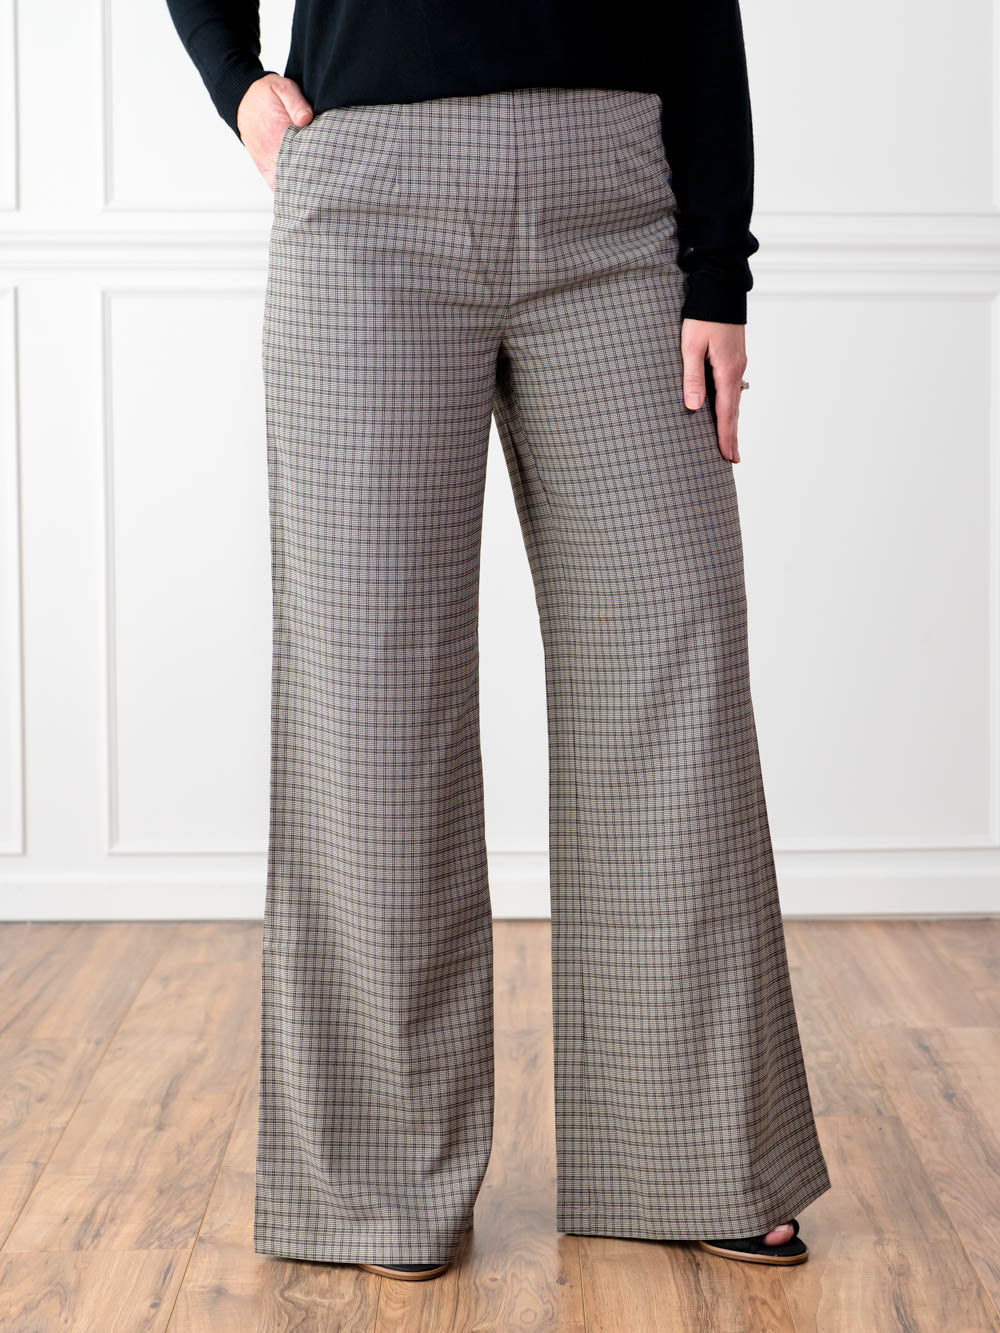 Plaid Pants for Tall Women